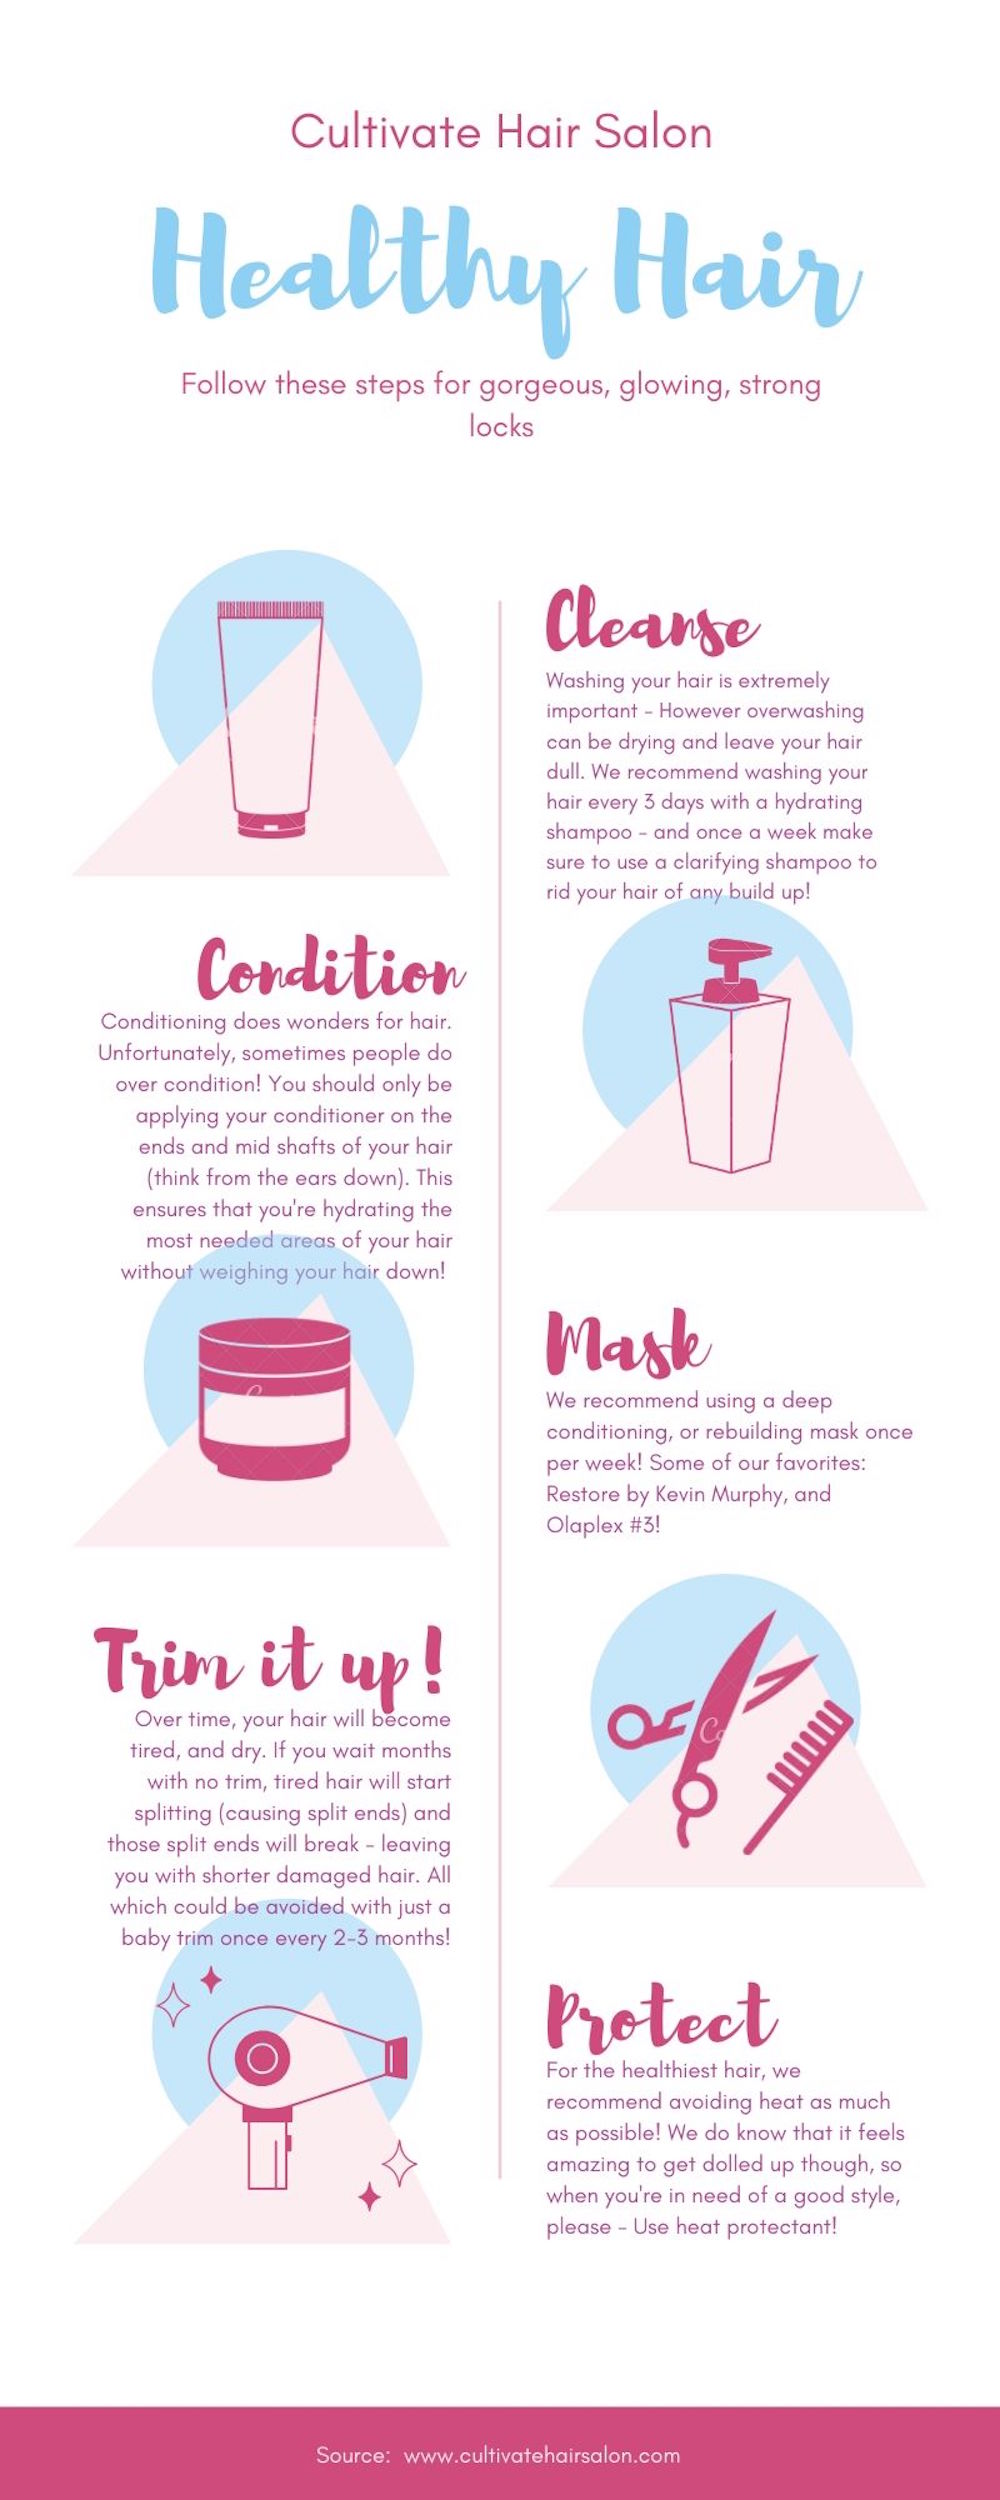 The Best Cheat Sheet For Keeping Your Hair Healthy! – Cultivate Hair Salon